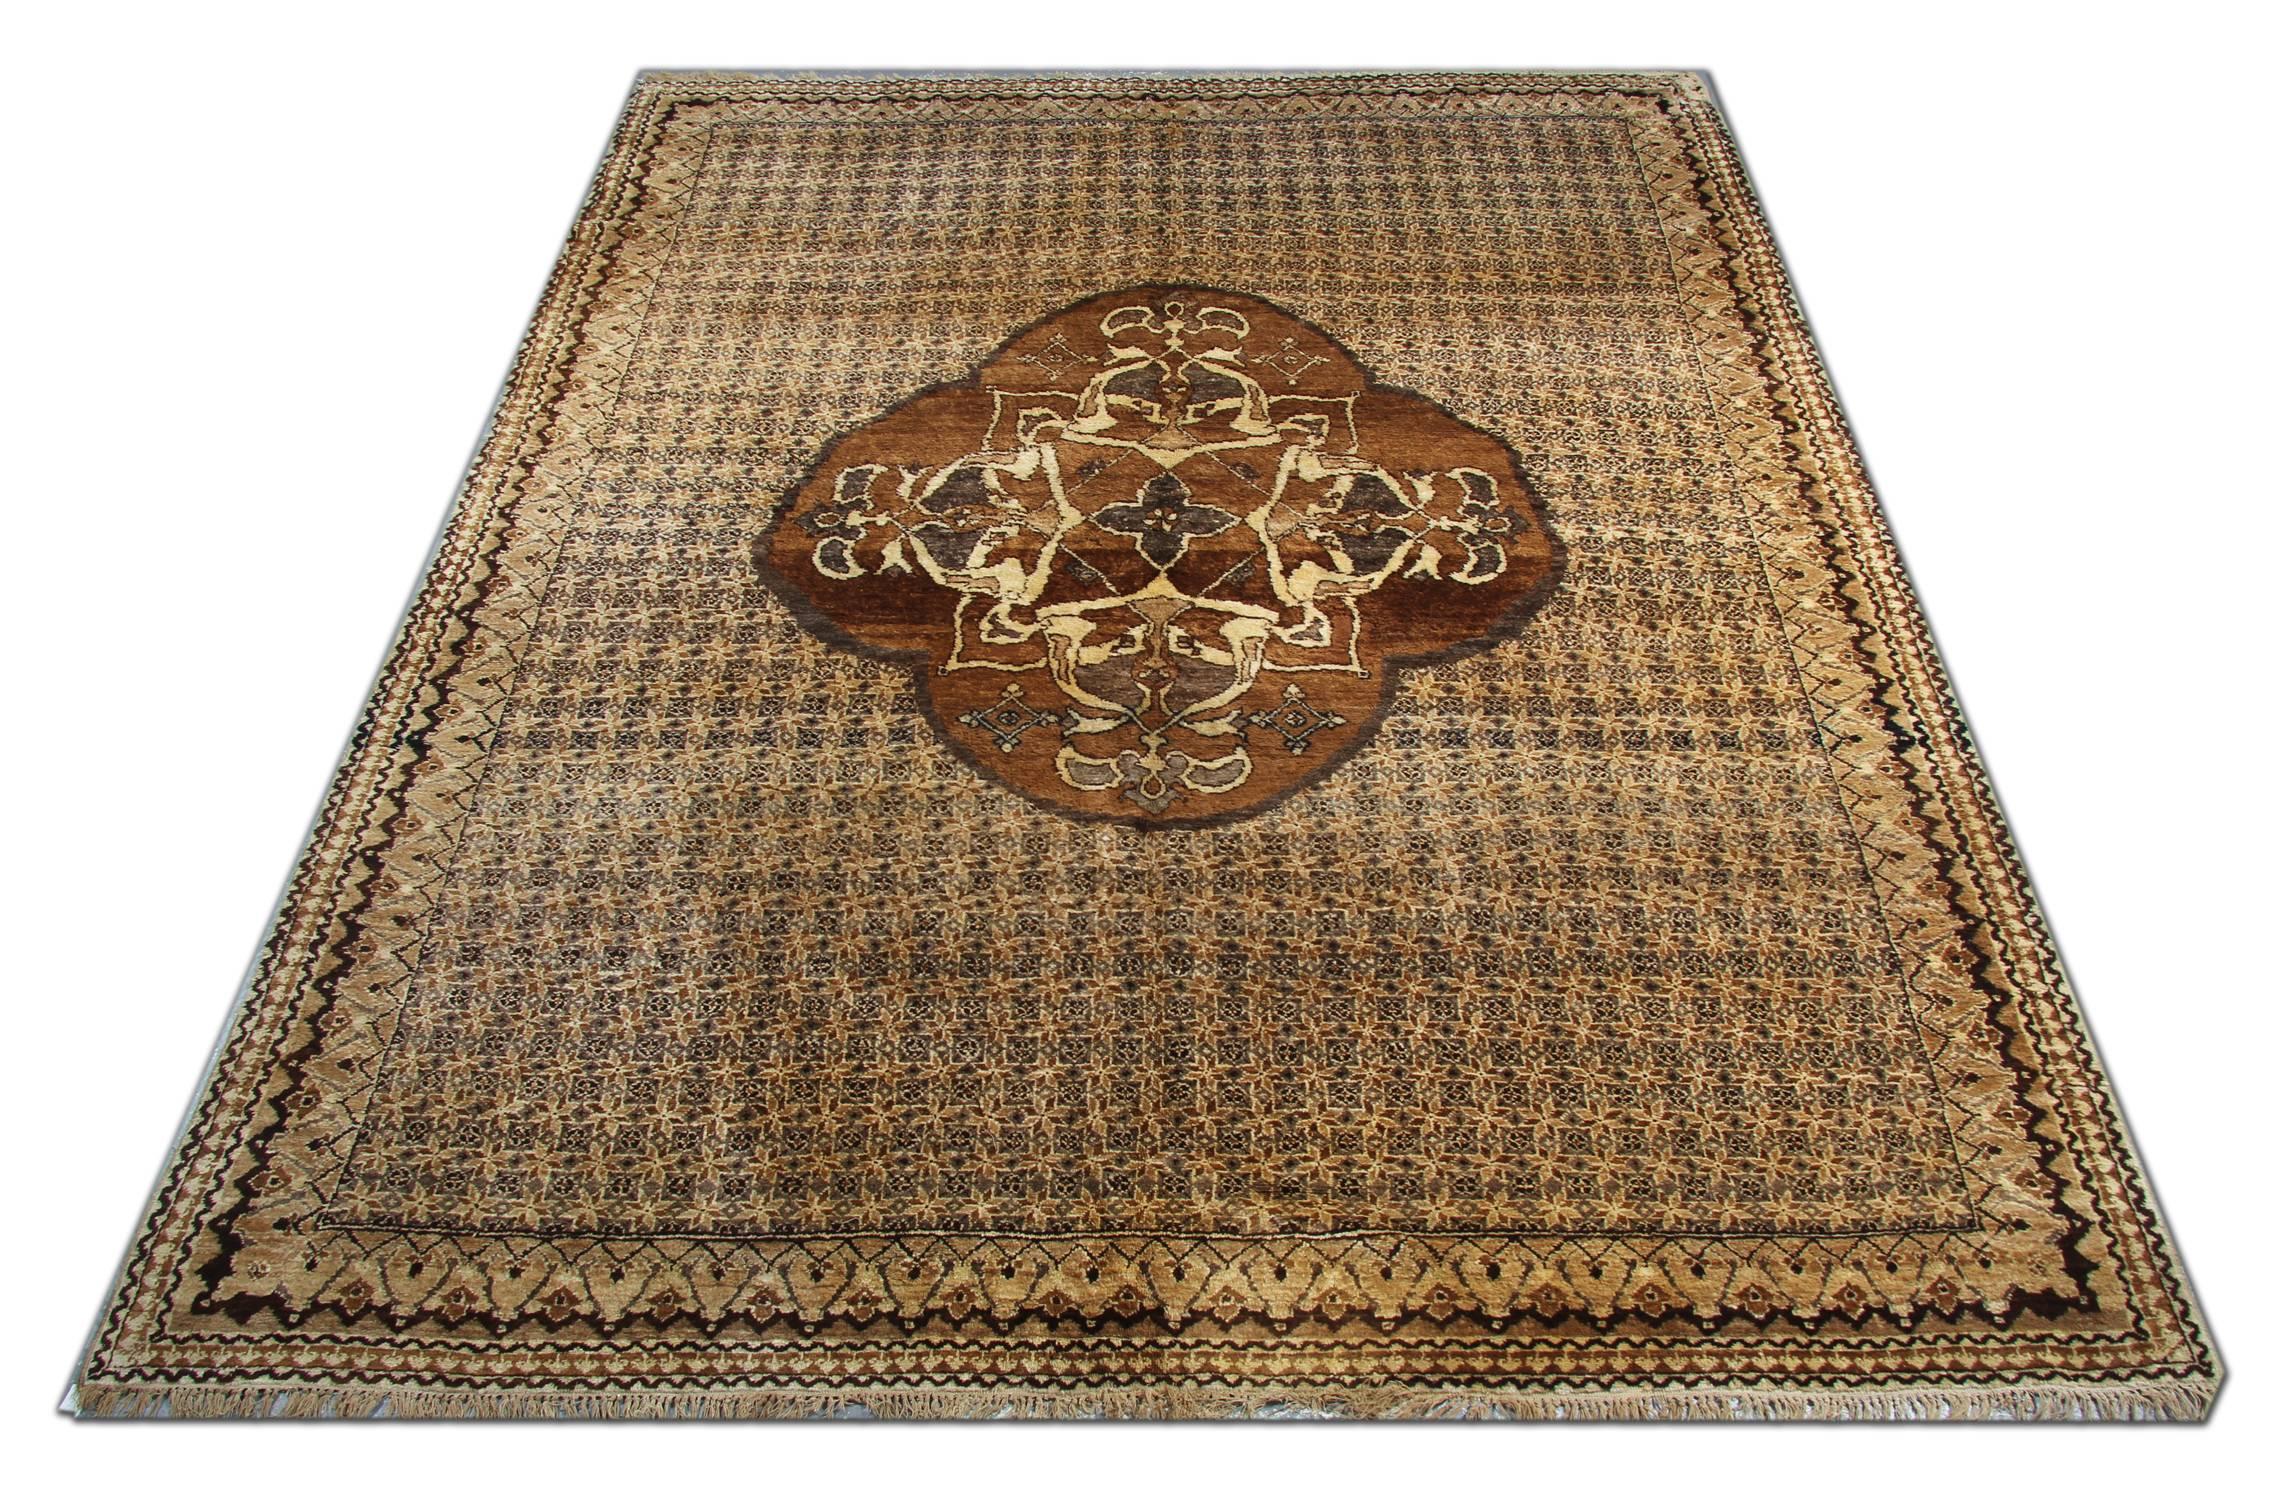 This handmade carpet antique rug is a Turkish brown rug with central medallion and lights brown background colour. These luxury rugs would complement your home as floor rugs. These large rugs look beautiful and would stand out as living room rugs